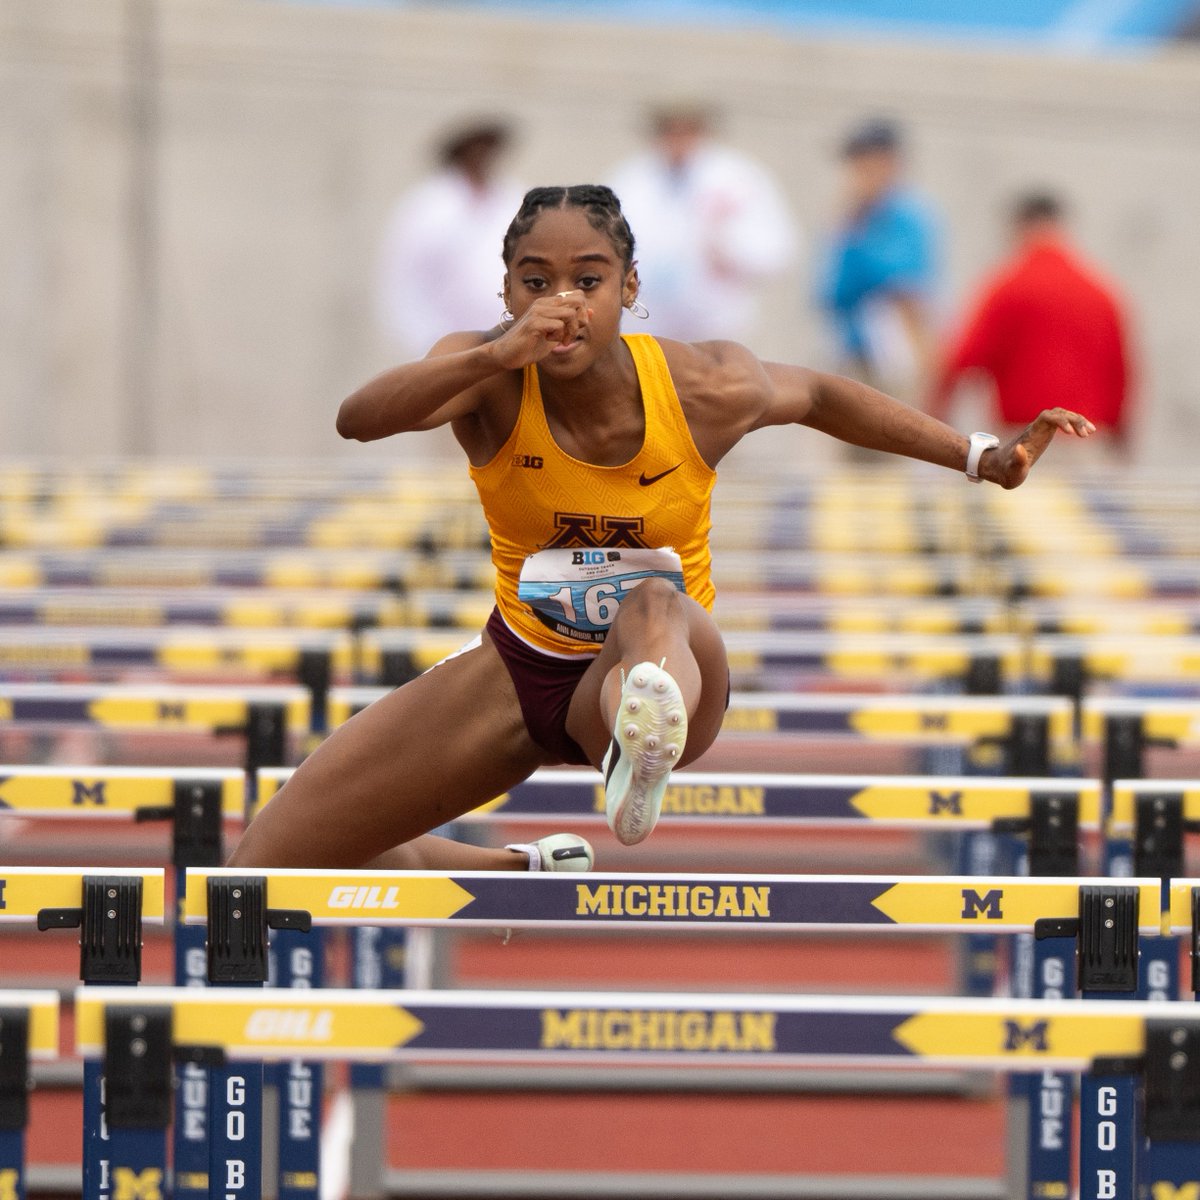 Autumn Glover getting things started for the #Gophers Saturday after a fantastic opening day in the heptathlon!!